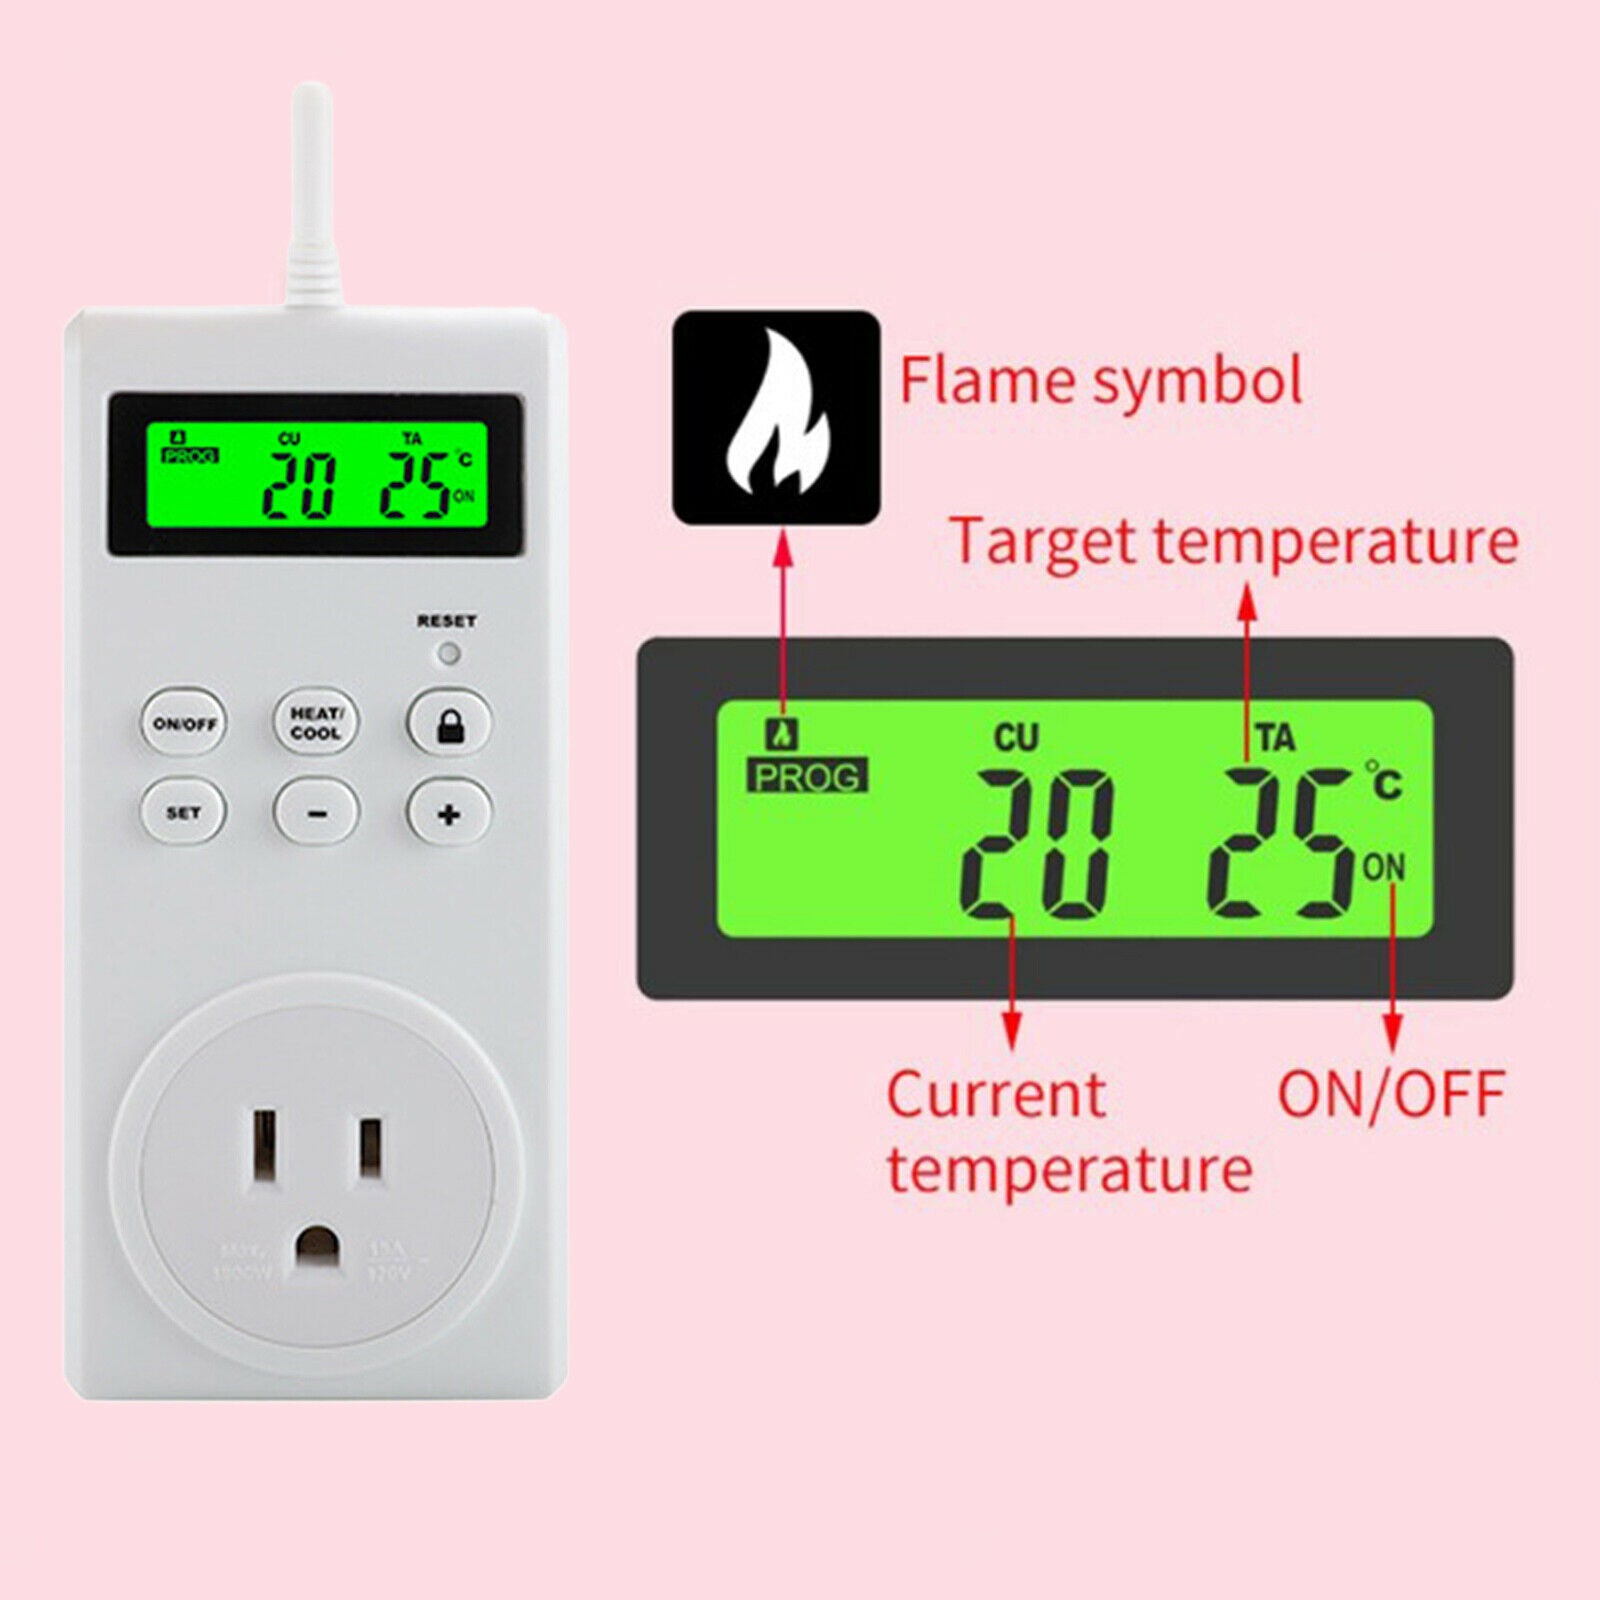 Programmable Digital Wireless Thermostat LCD Switch Plug-in Socket Outlets